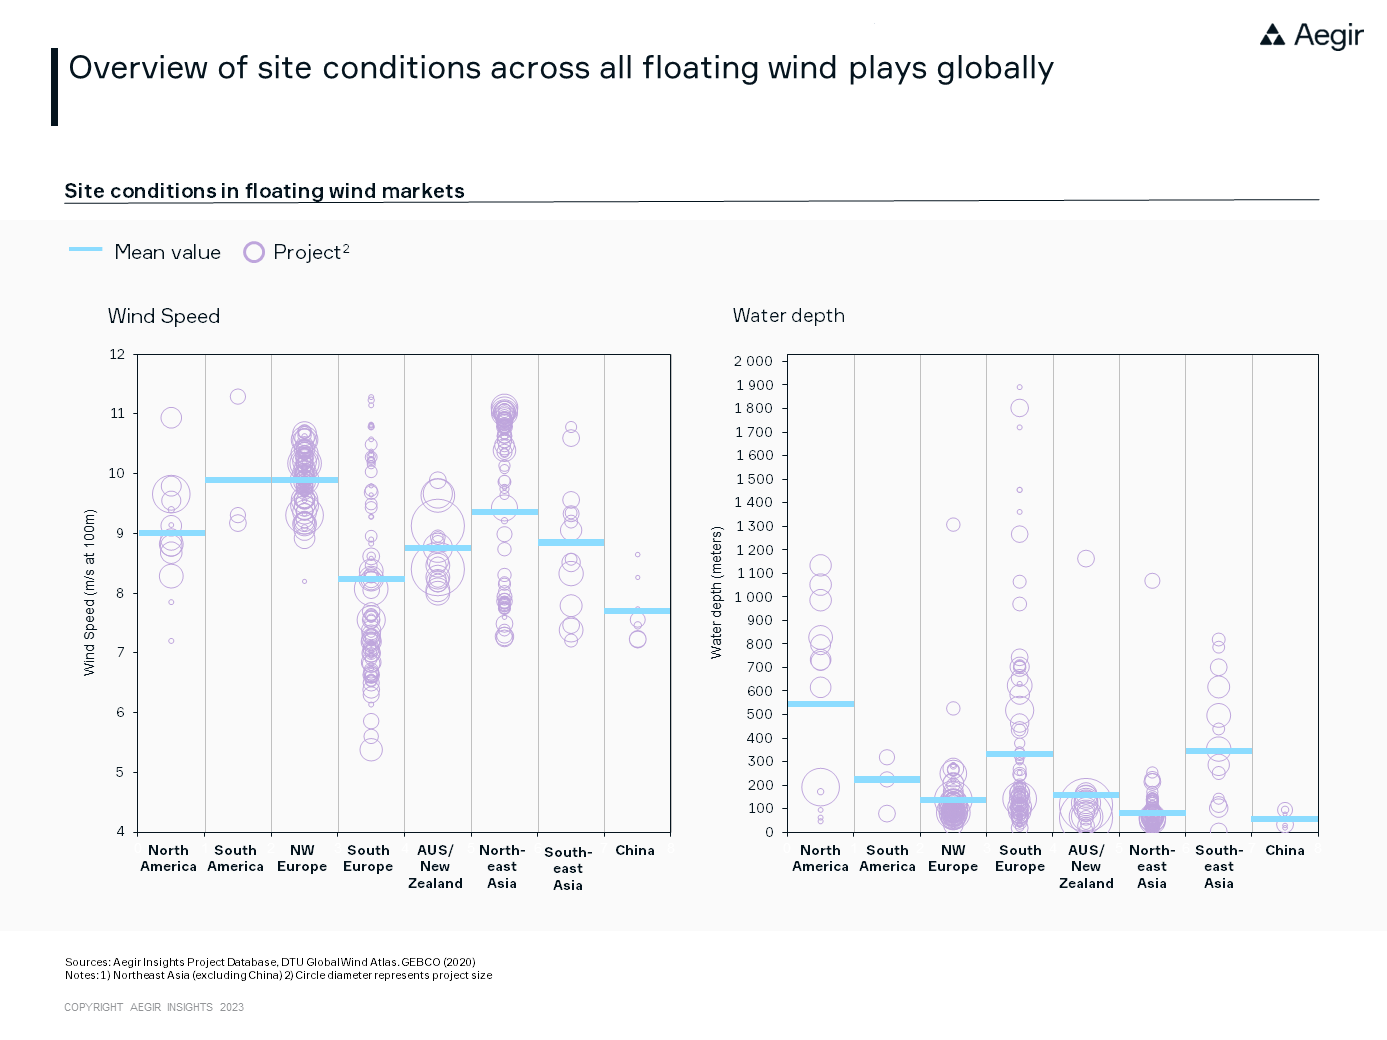 Graphic by Aegir Insights giving an overview of site conditions across all floating offshore wind plays globally.